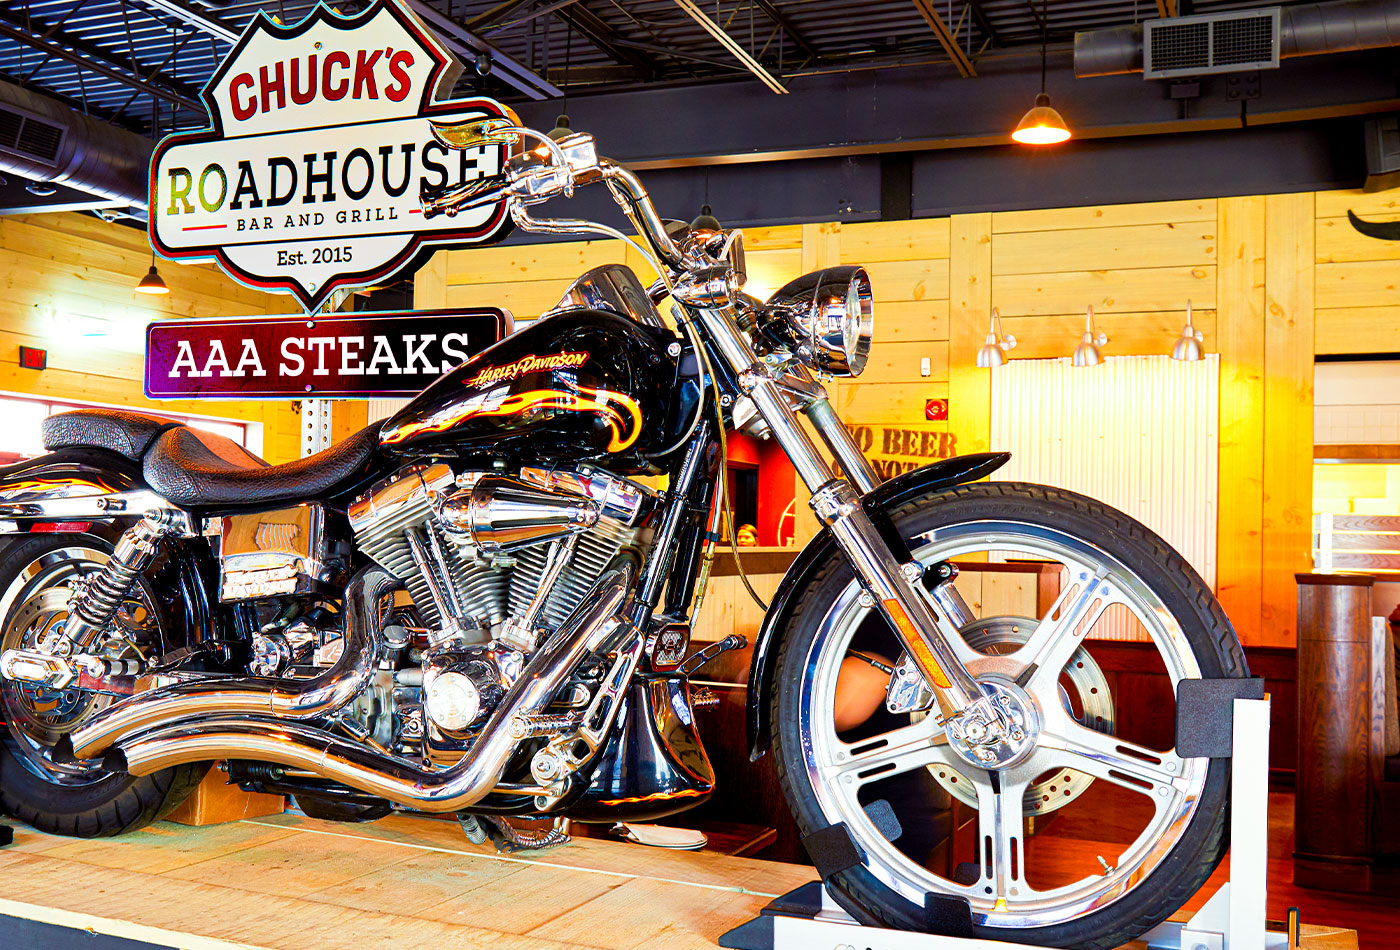 6 Fun Facts About Chuck’s Roadhouse You Didn’t Know!